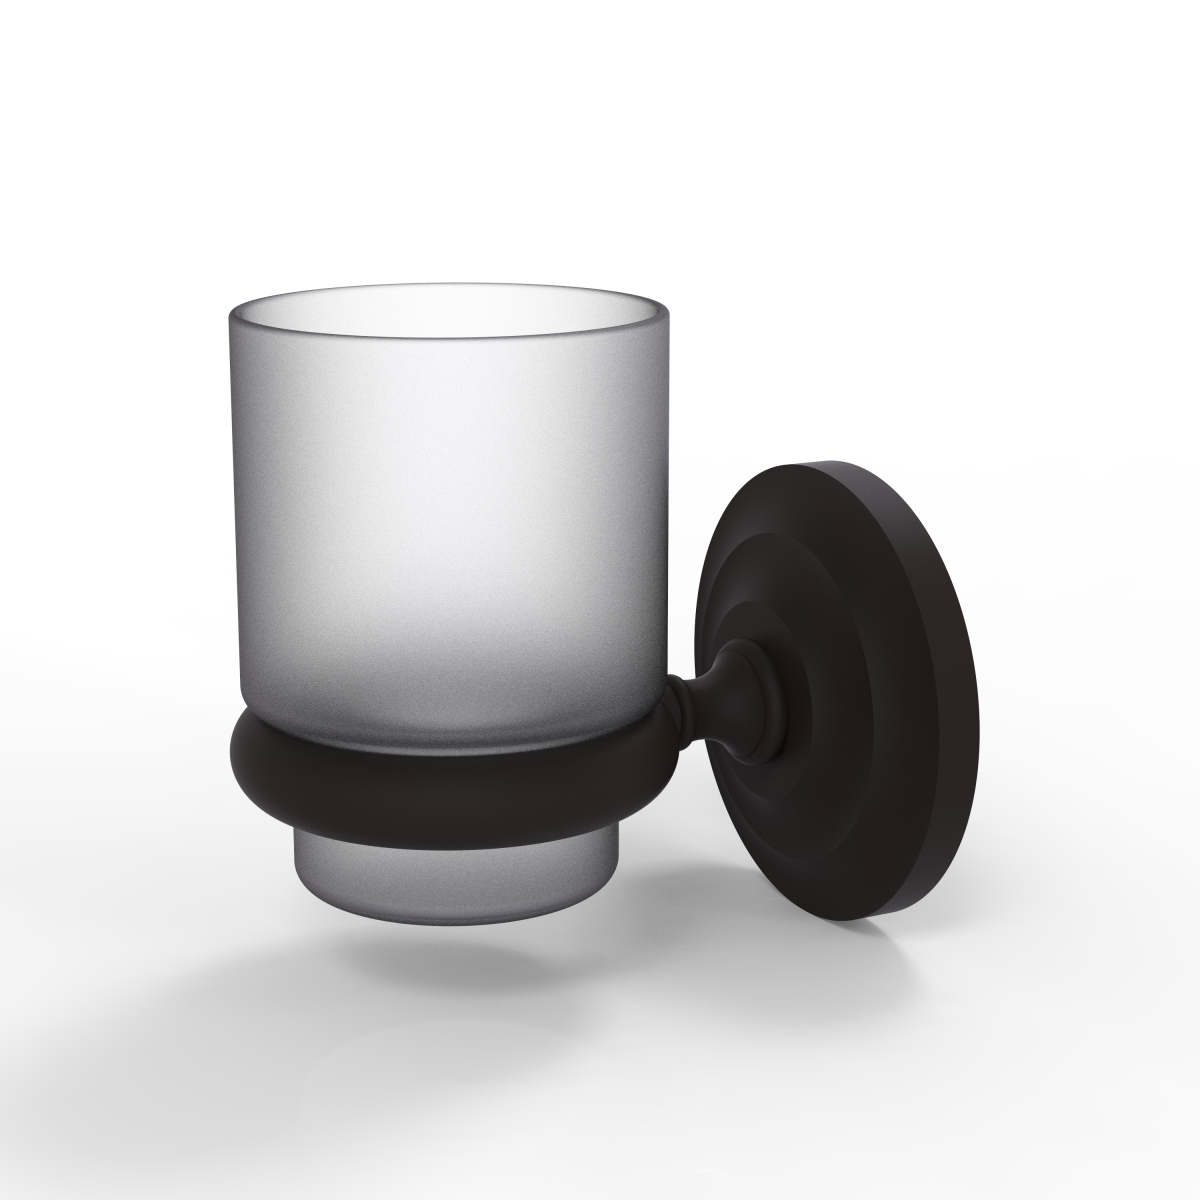 Pqn-64-orb Prestige Que New Collection Wall Mounted Votive Candle Holder, Oil Rubbed Bronze